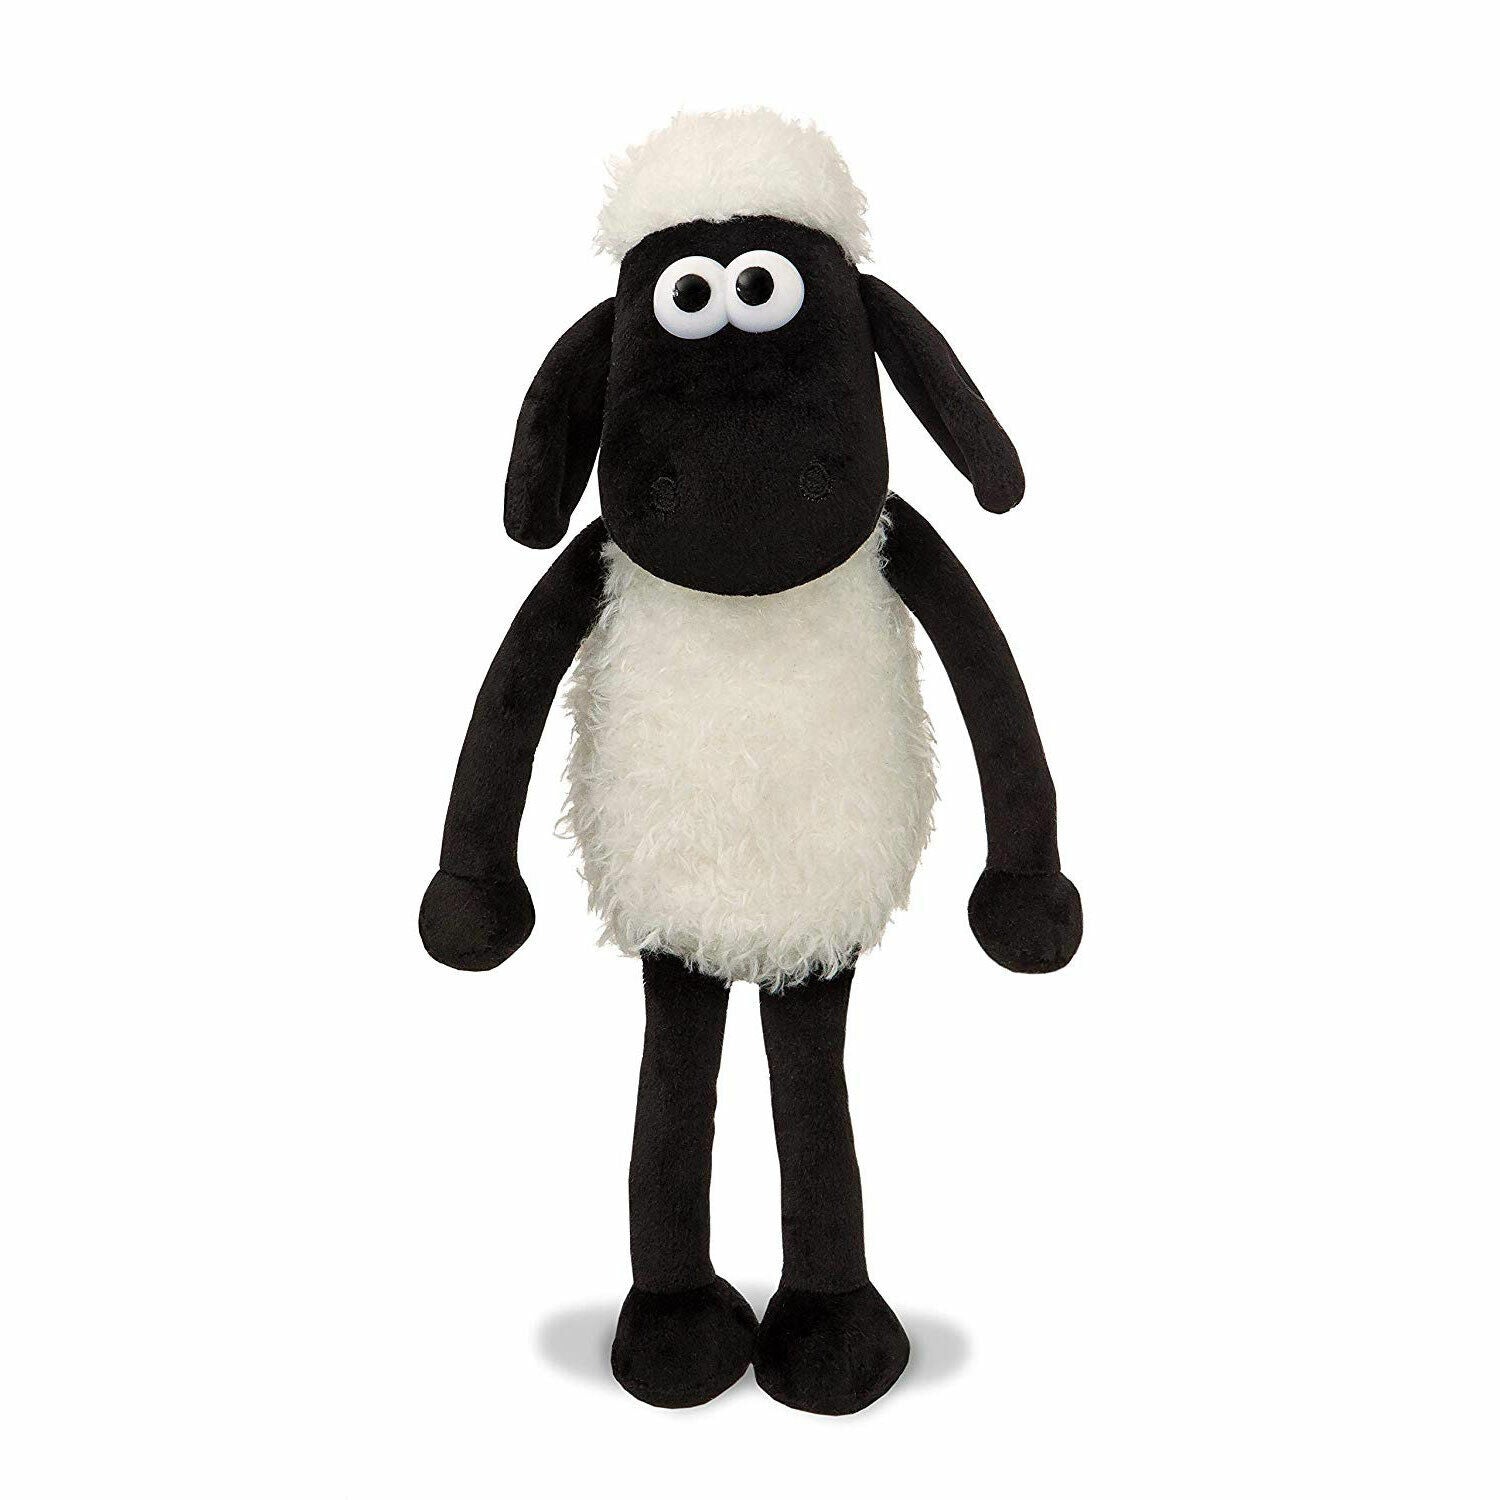 New Shaun the Sheep 8-Inch Plush Soft Toy - Adorable and Cuddly!